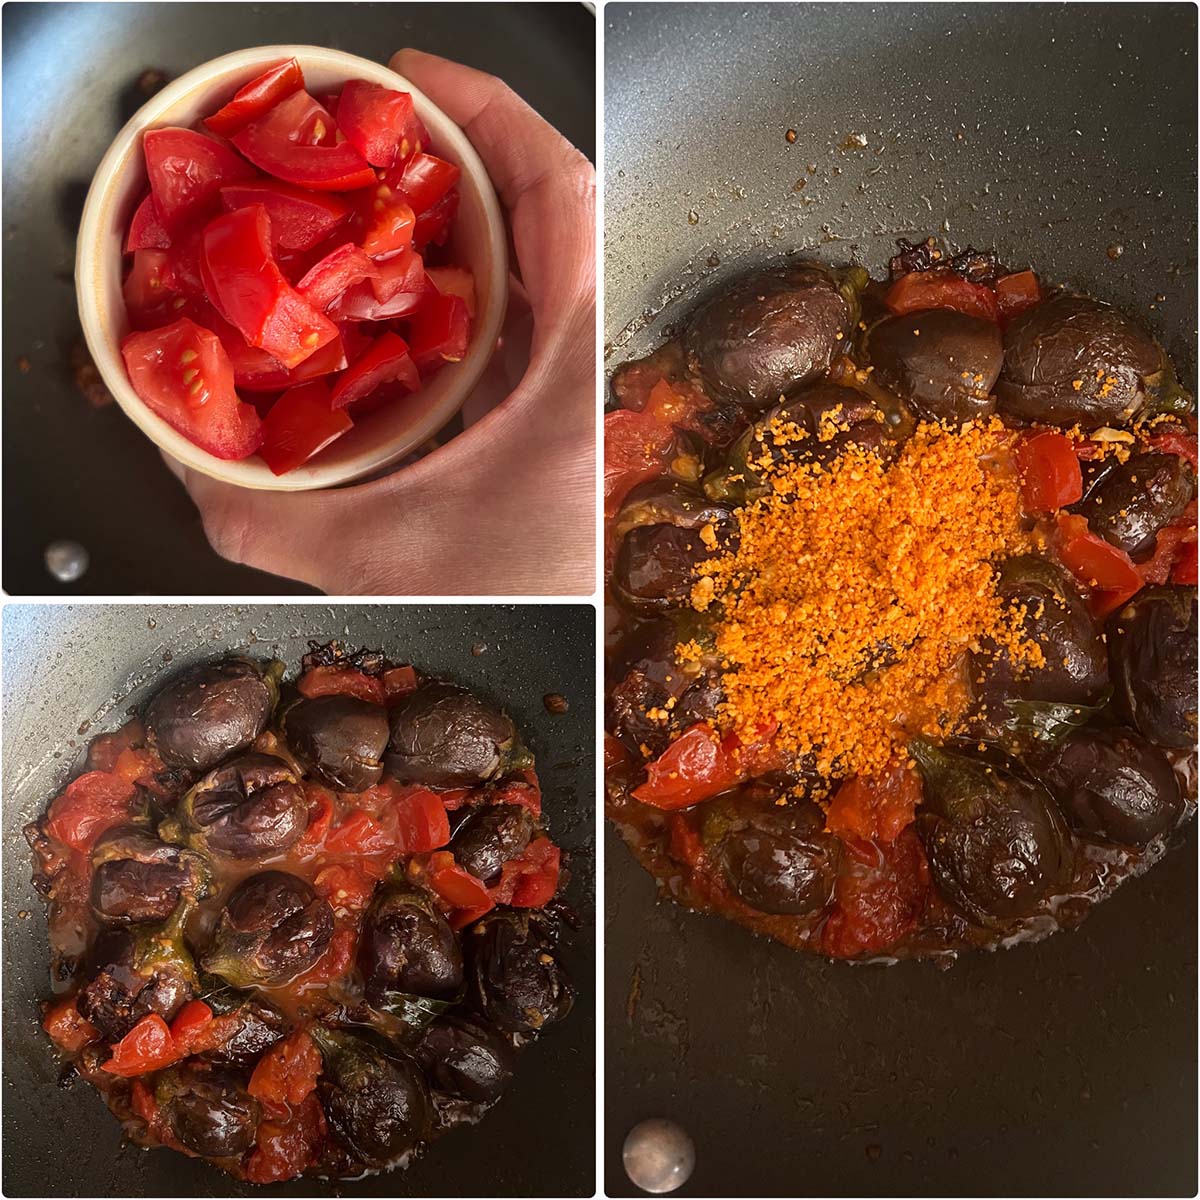 3 panel photo showing the addition of tomatoes and peanut powder to the pan.